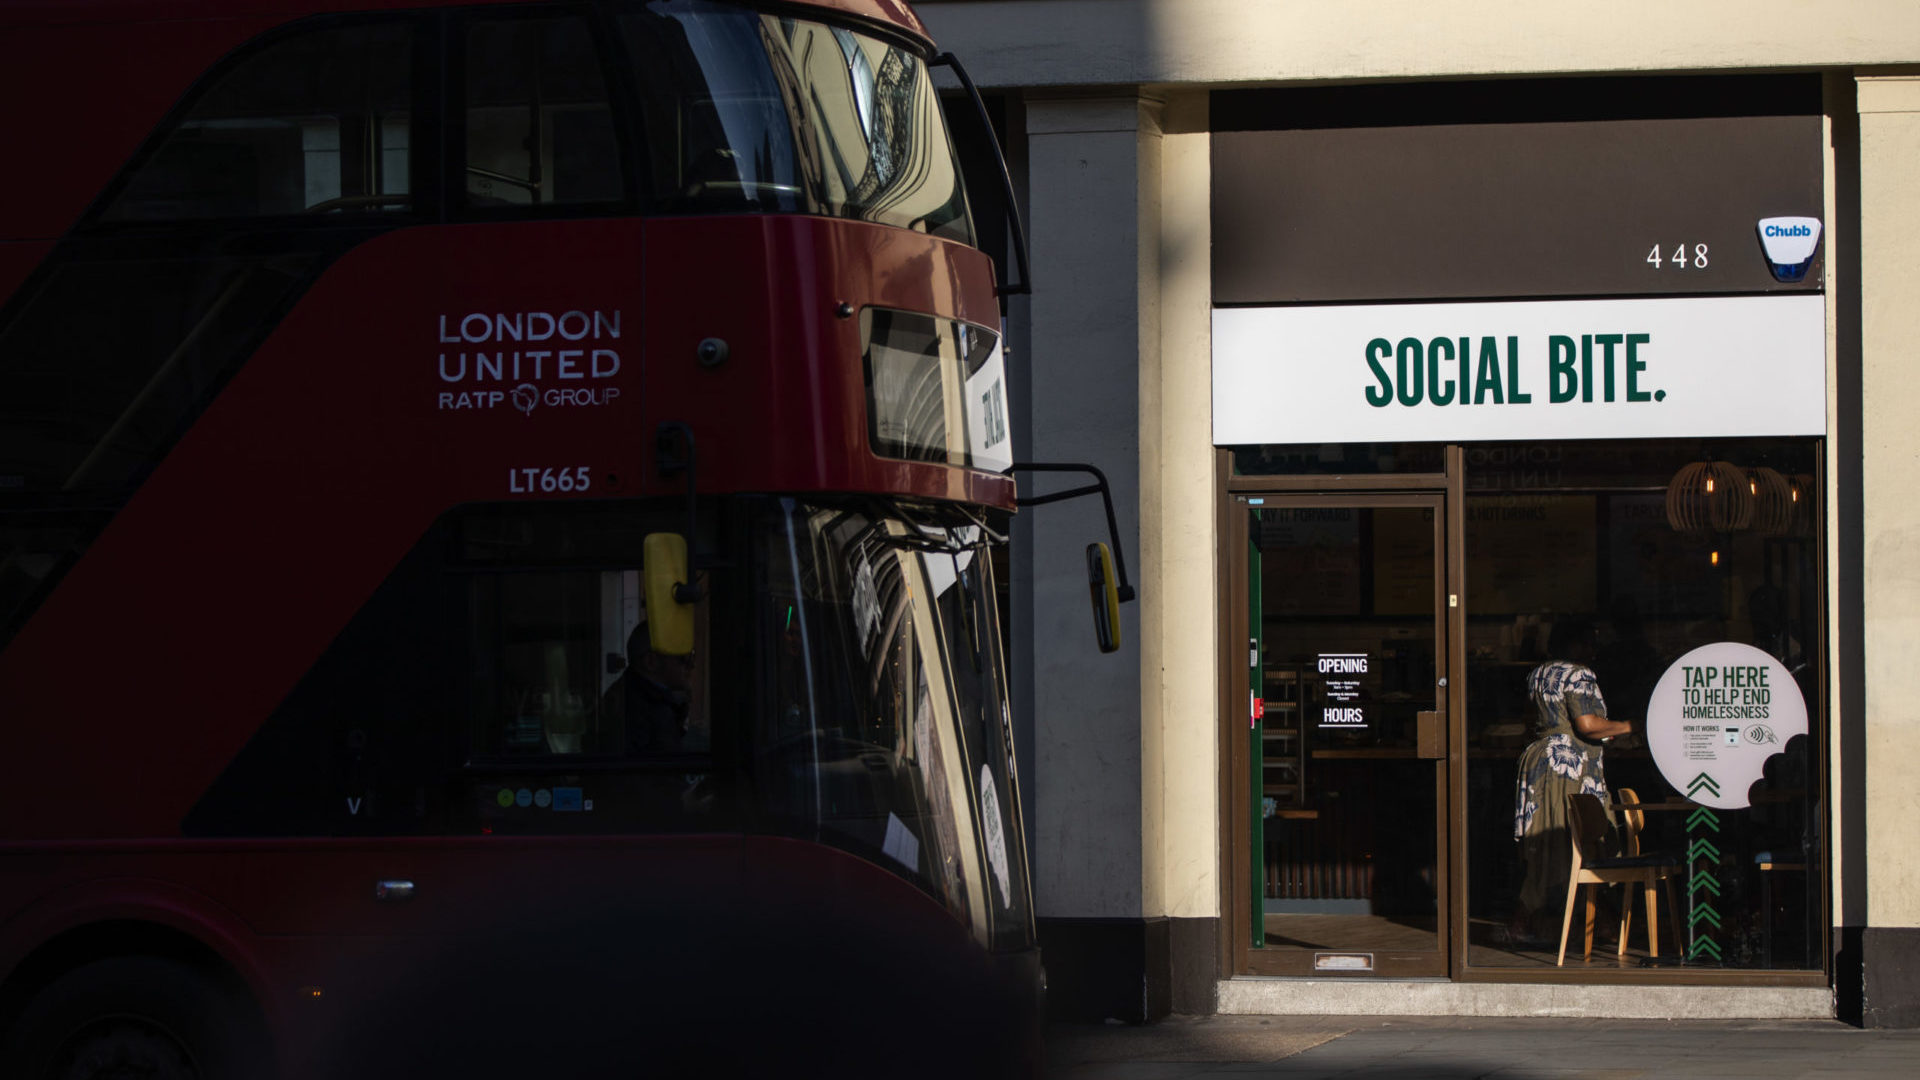 Photo of Social Bite cafe, with London bus in front